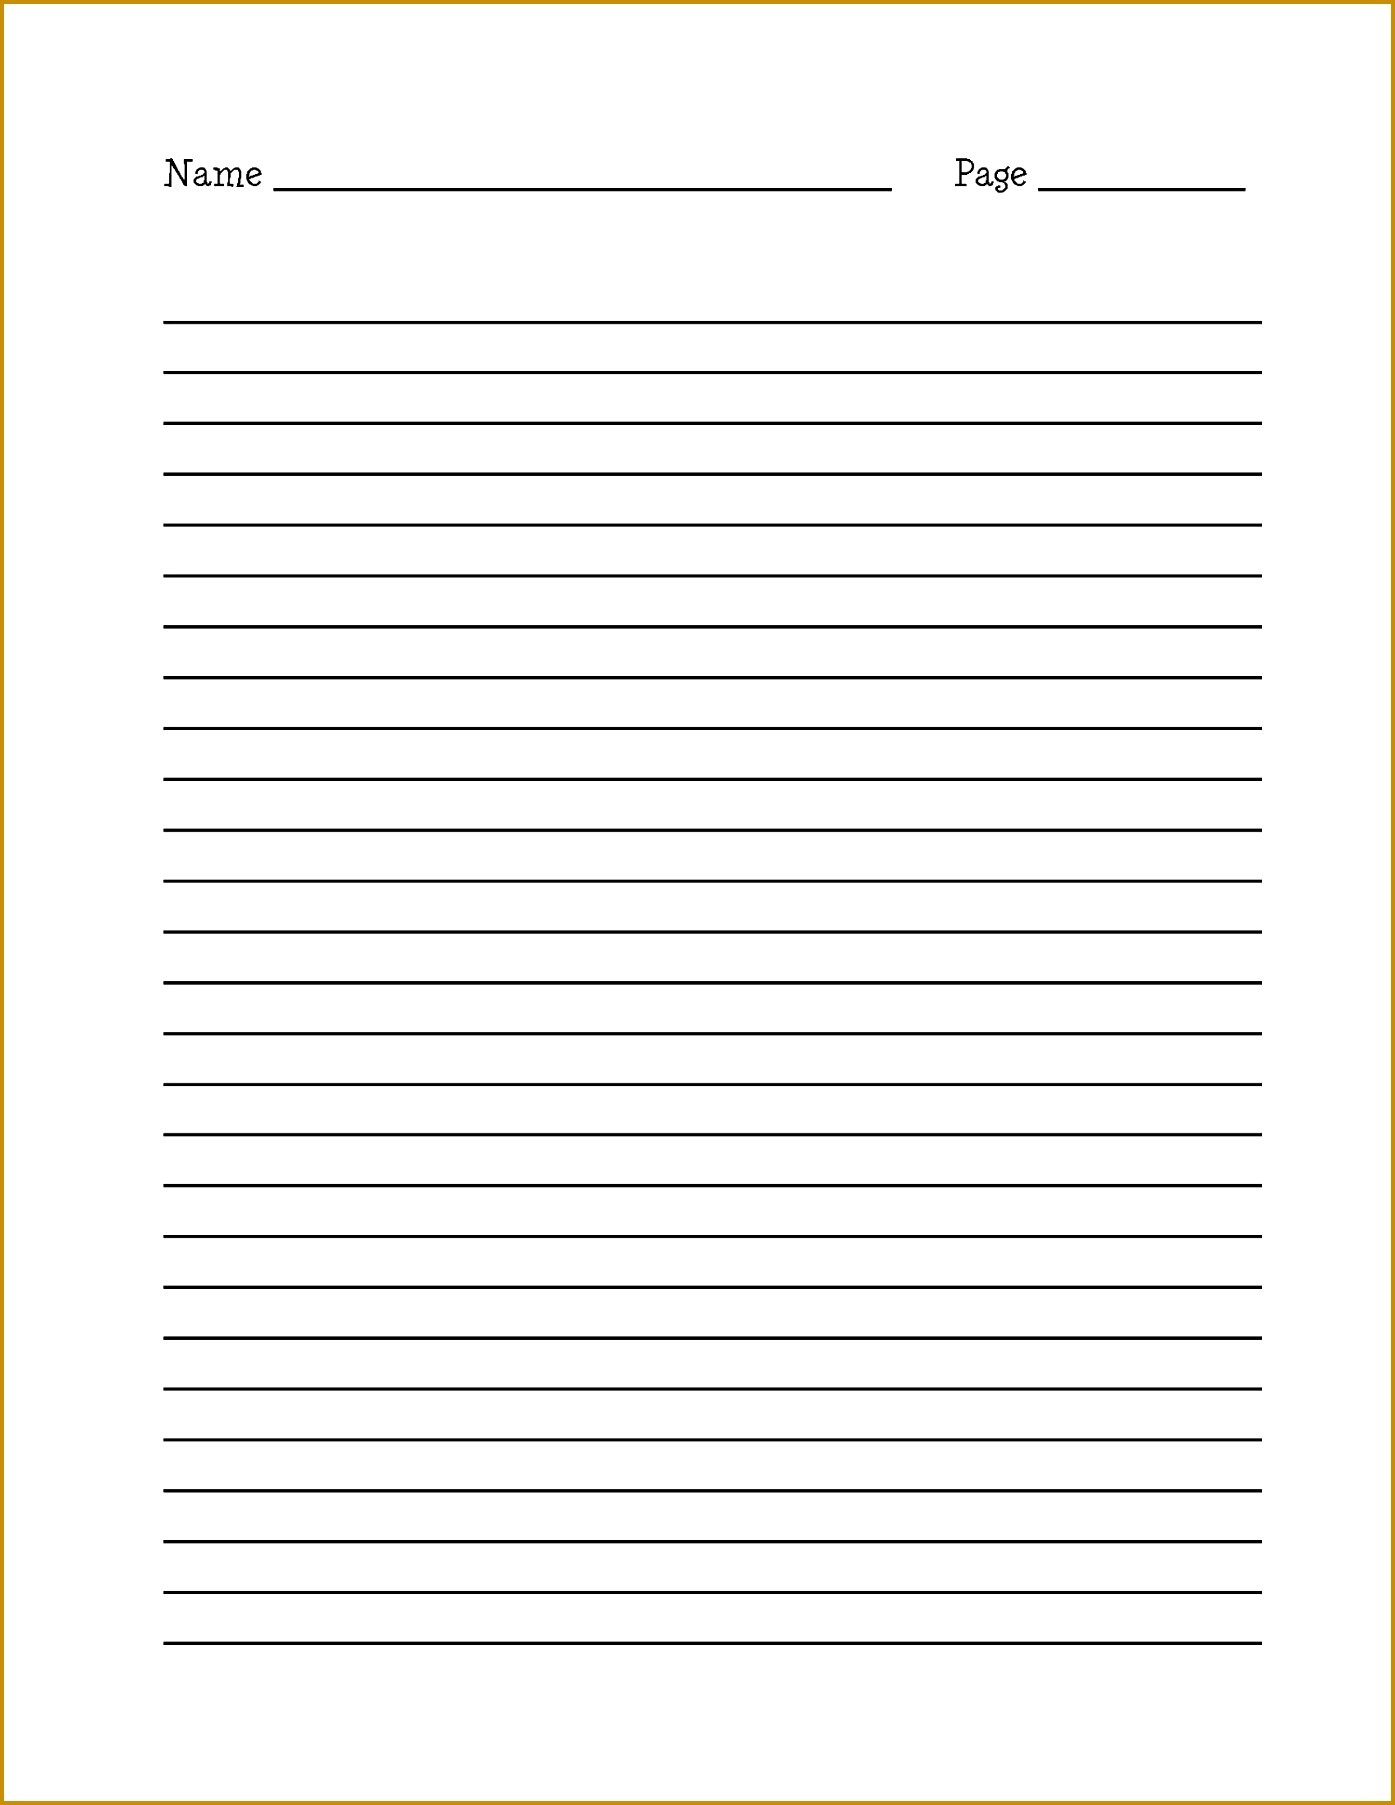 11 12 Template For Ruled Paper | Lasweetvida Within College Ruled Lined Paper Template Word 2007